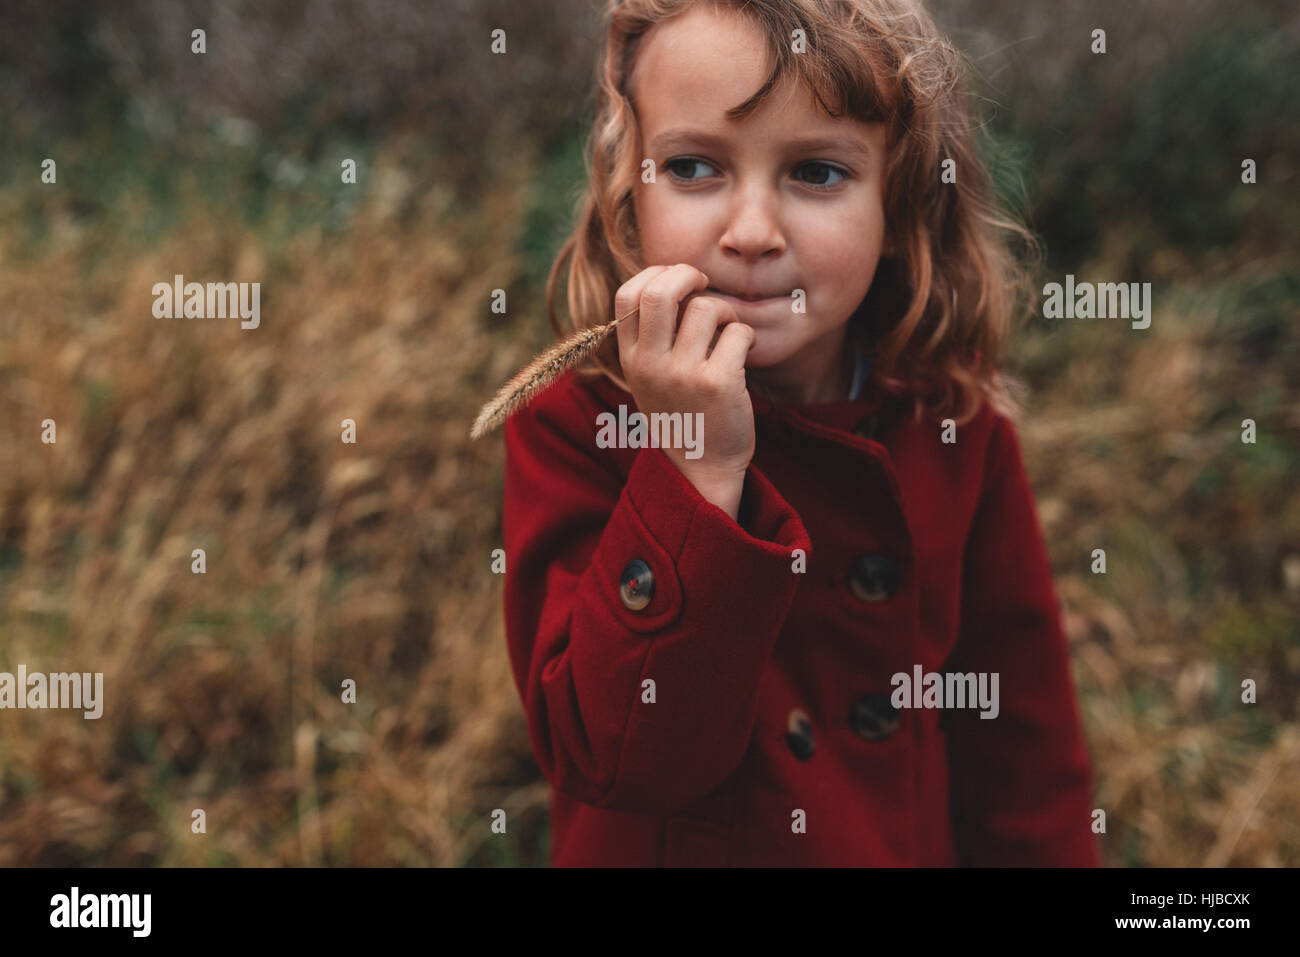 Portrait of girl chewing long grass in field Stock Photo